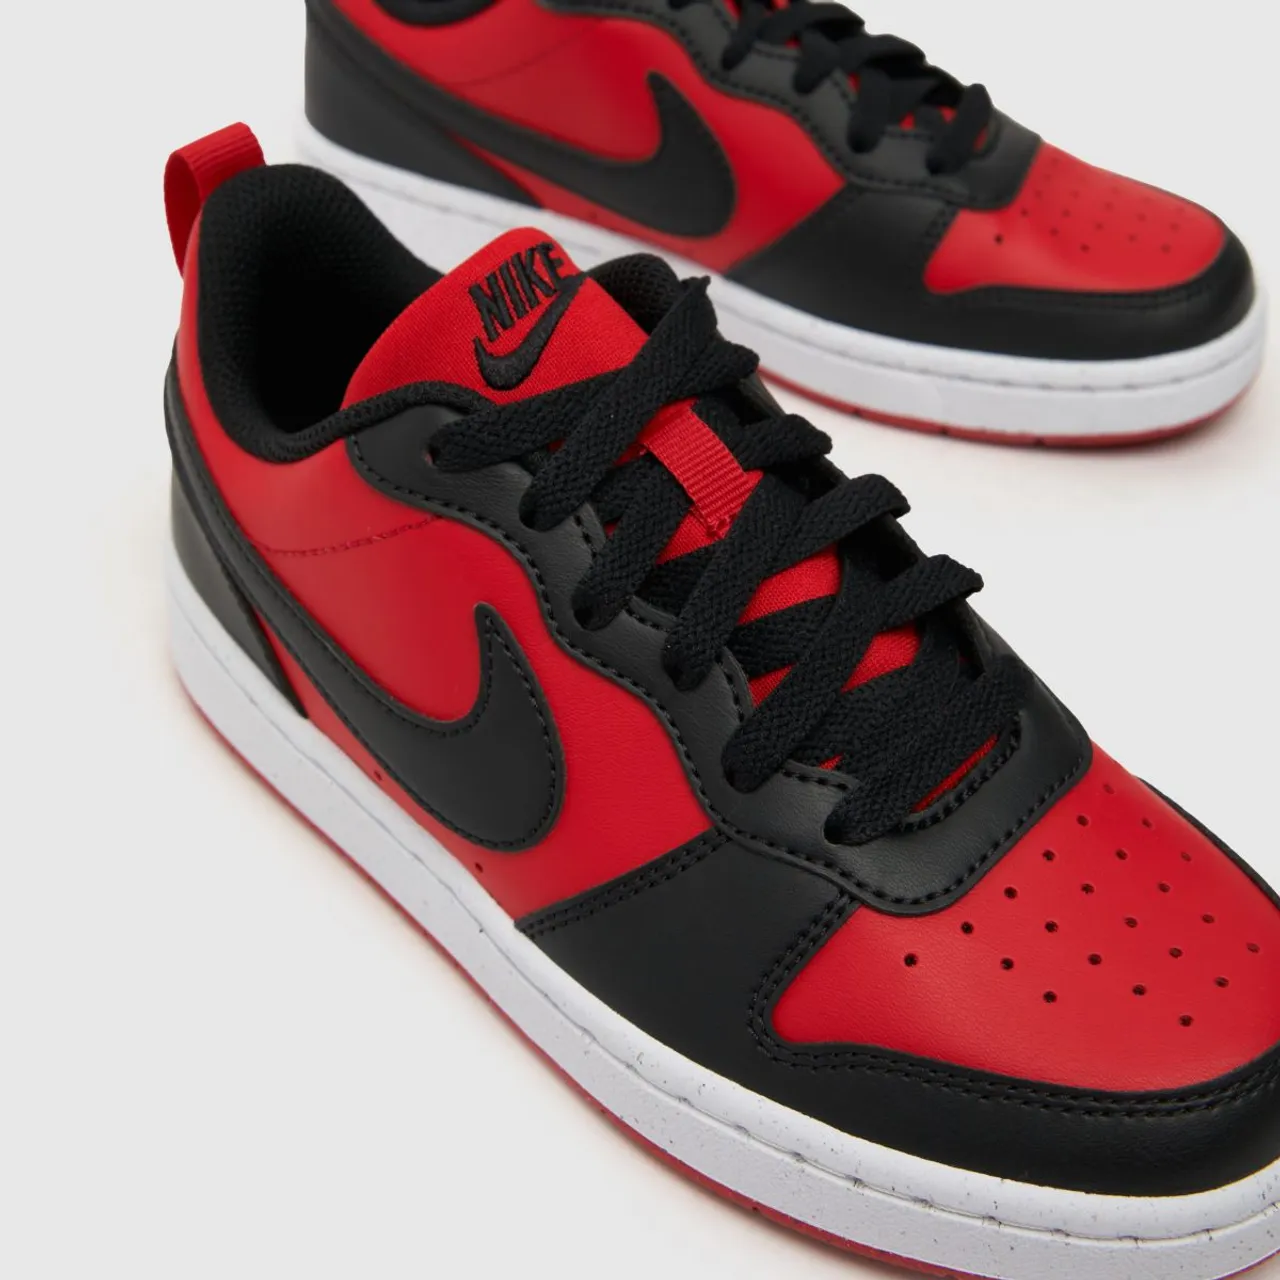 Nike Black & Red Court Borough Low Recraft Boys Youth Trainers